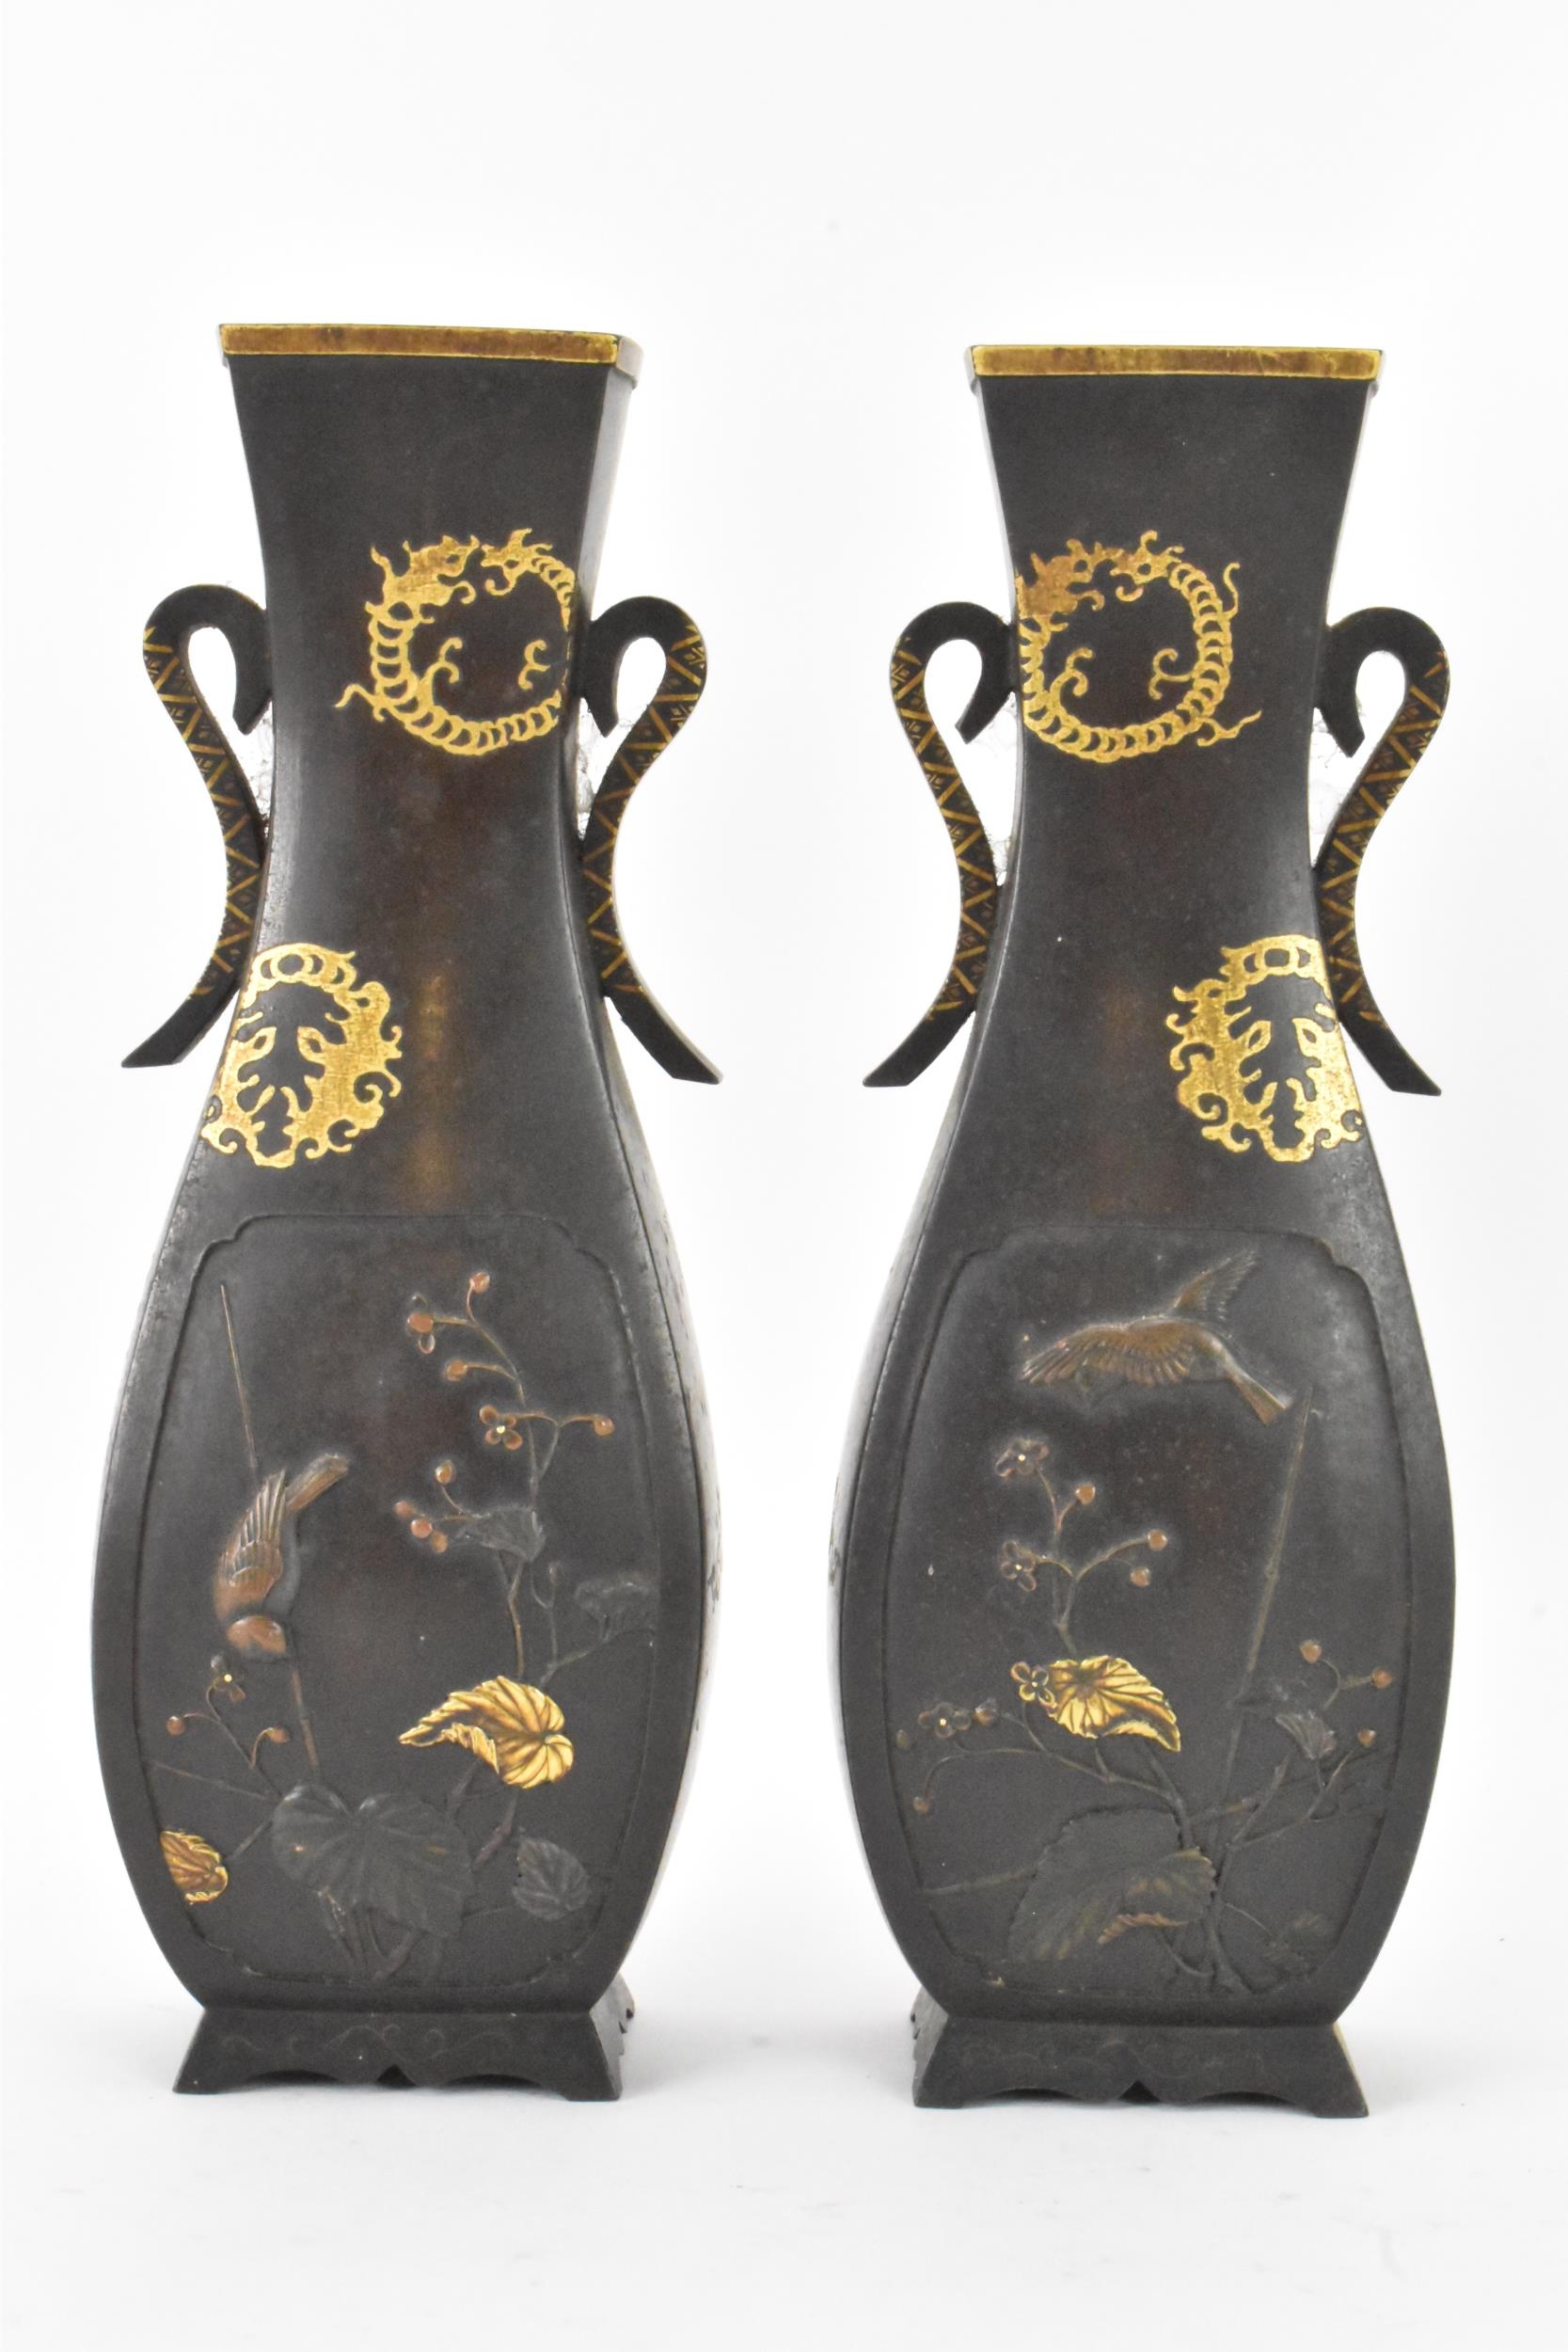 A pair of Japanese Meiji period iron vases, decorated with panels depicting birds and flowers in